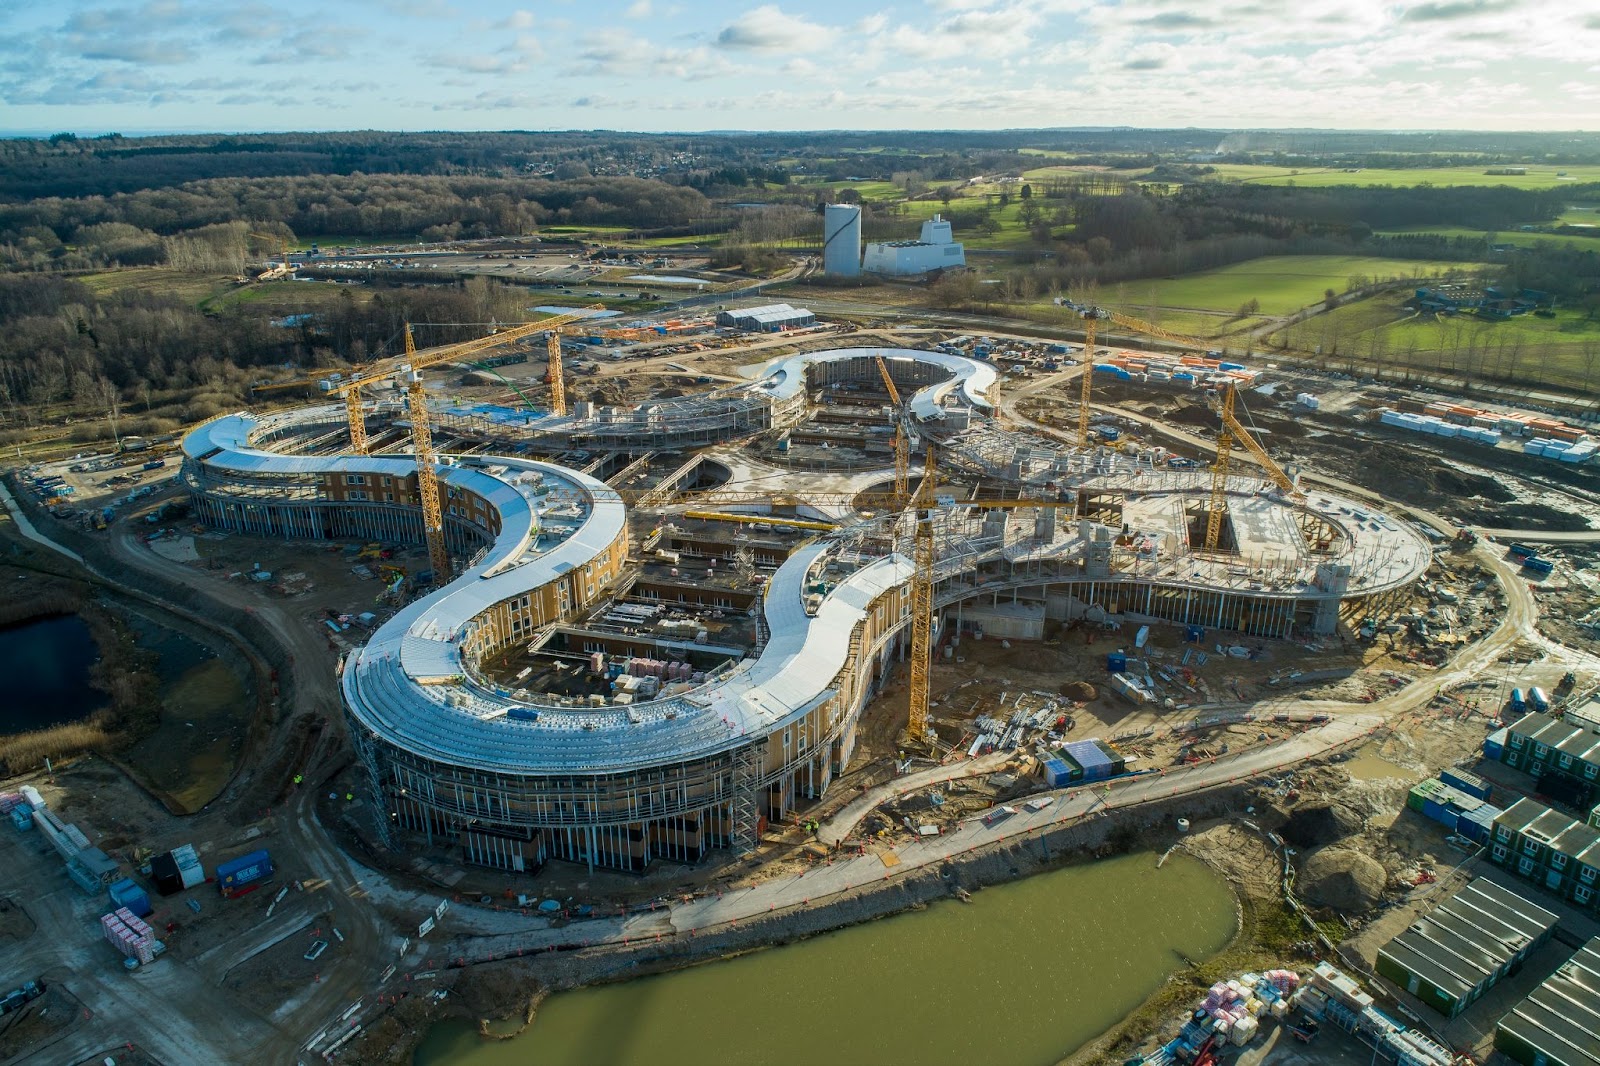 Picture of Nyt Hospital Nordsjælland hospital project and the construction site. Case study how a hospital construction project leverages new construction software like Imerso and achieves astonishing results.